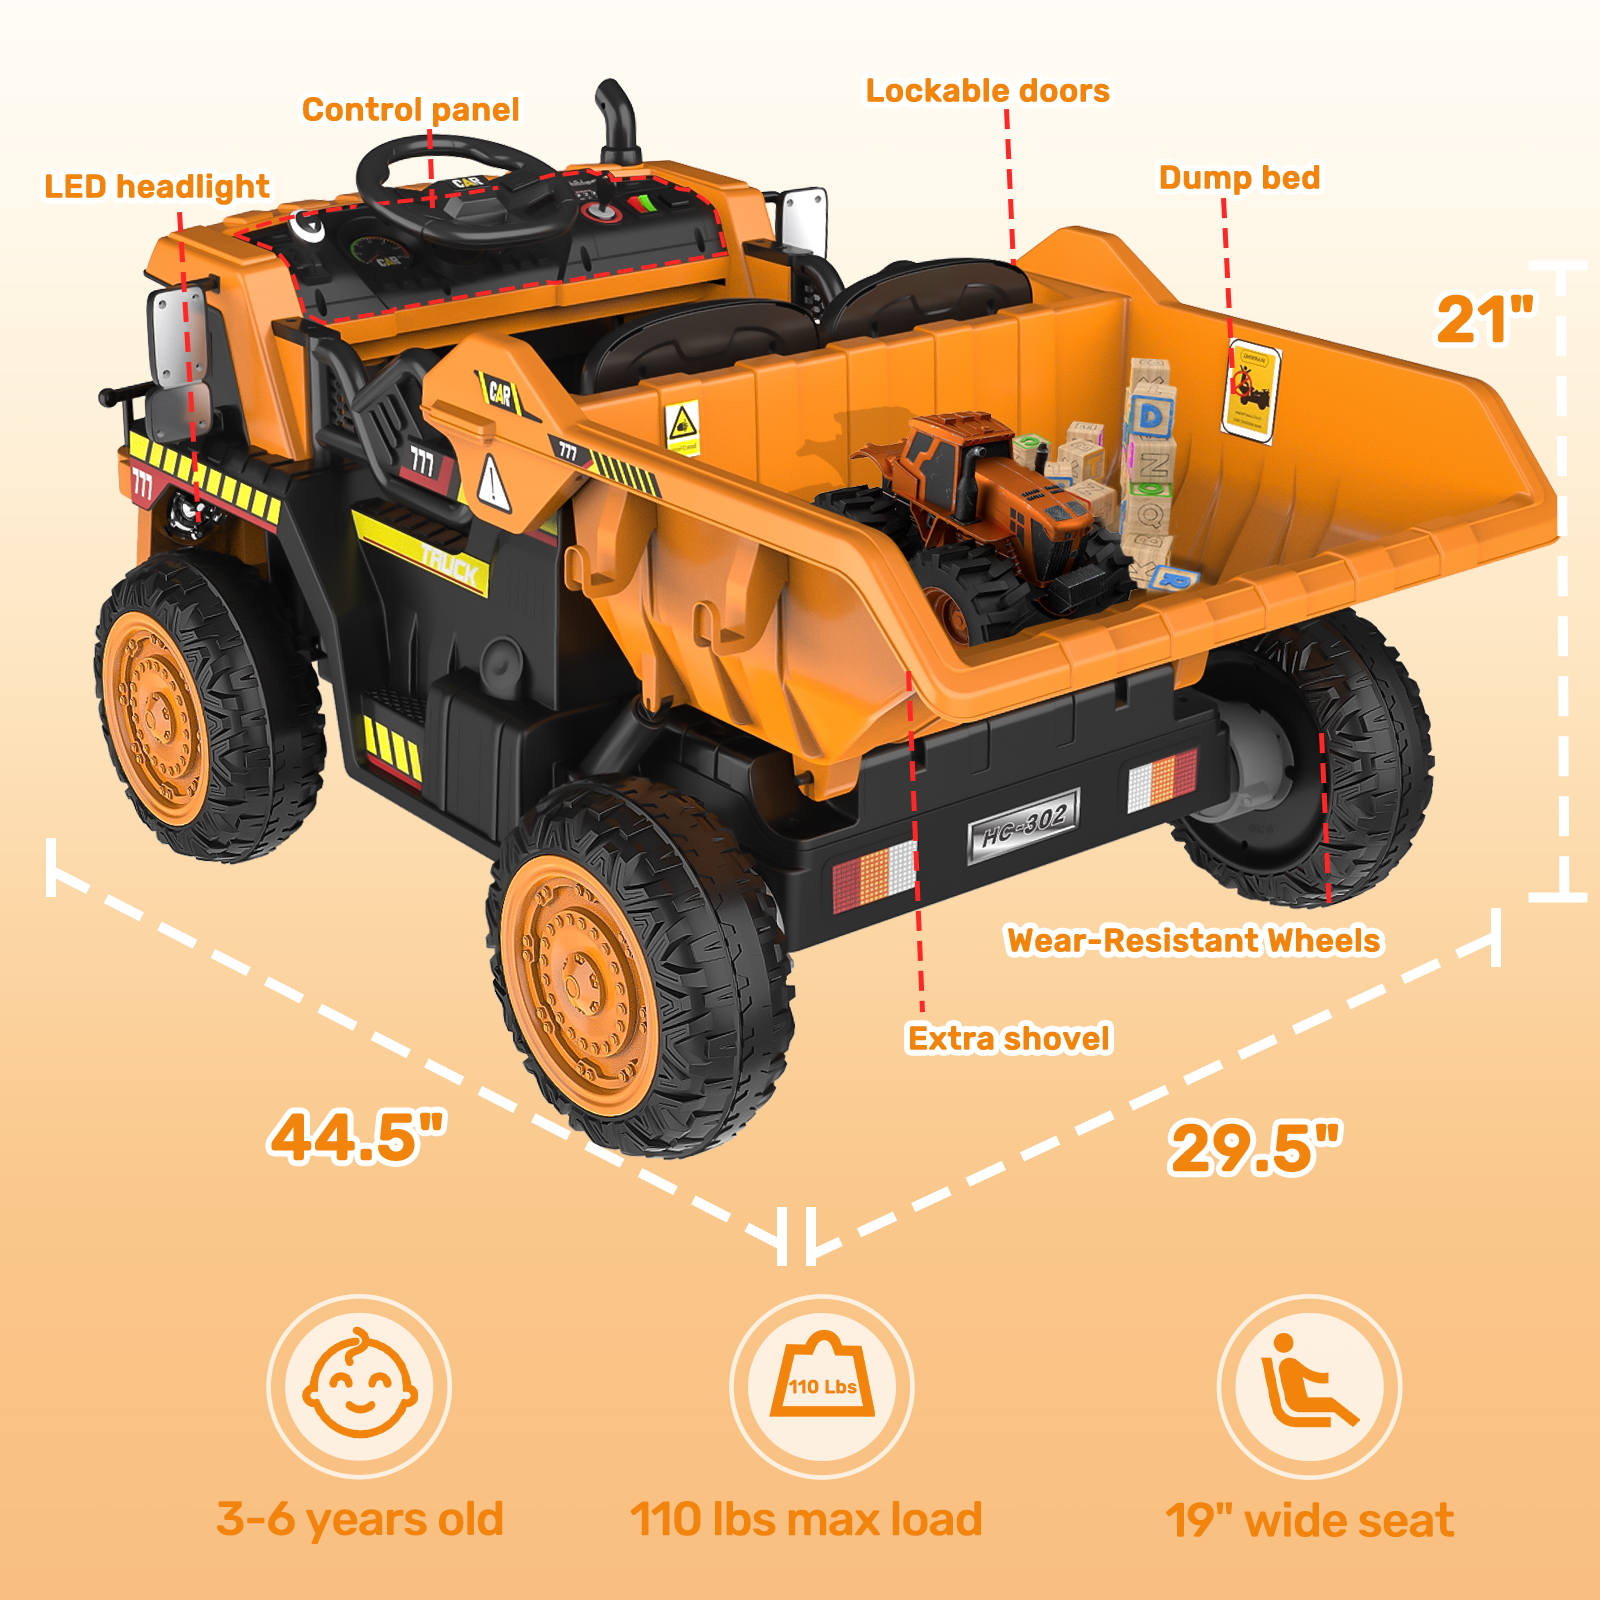 TOKTOO 12V Battery Powered Ride-on Dump Truck with Remote Control, Music Player, Electric Dump Bucket, Kids Tractor -Ginger Yellow - image 2 of 7